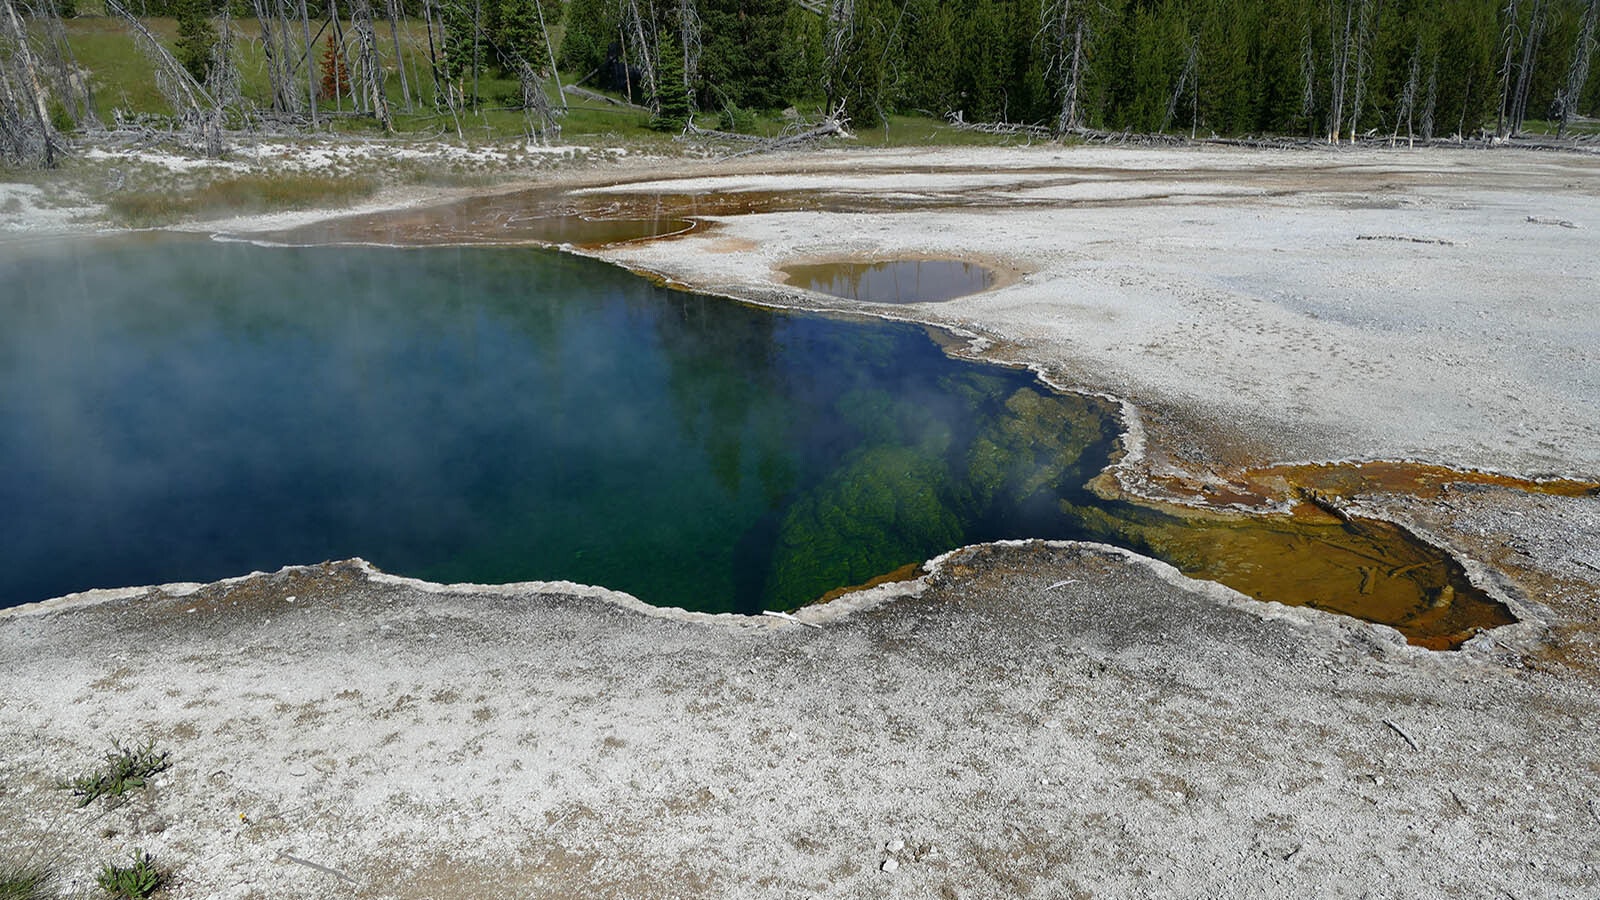 Abyss Pool Yellowstone 11 17 22